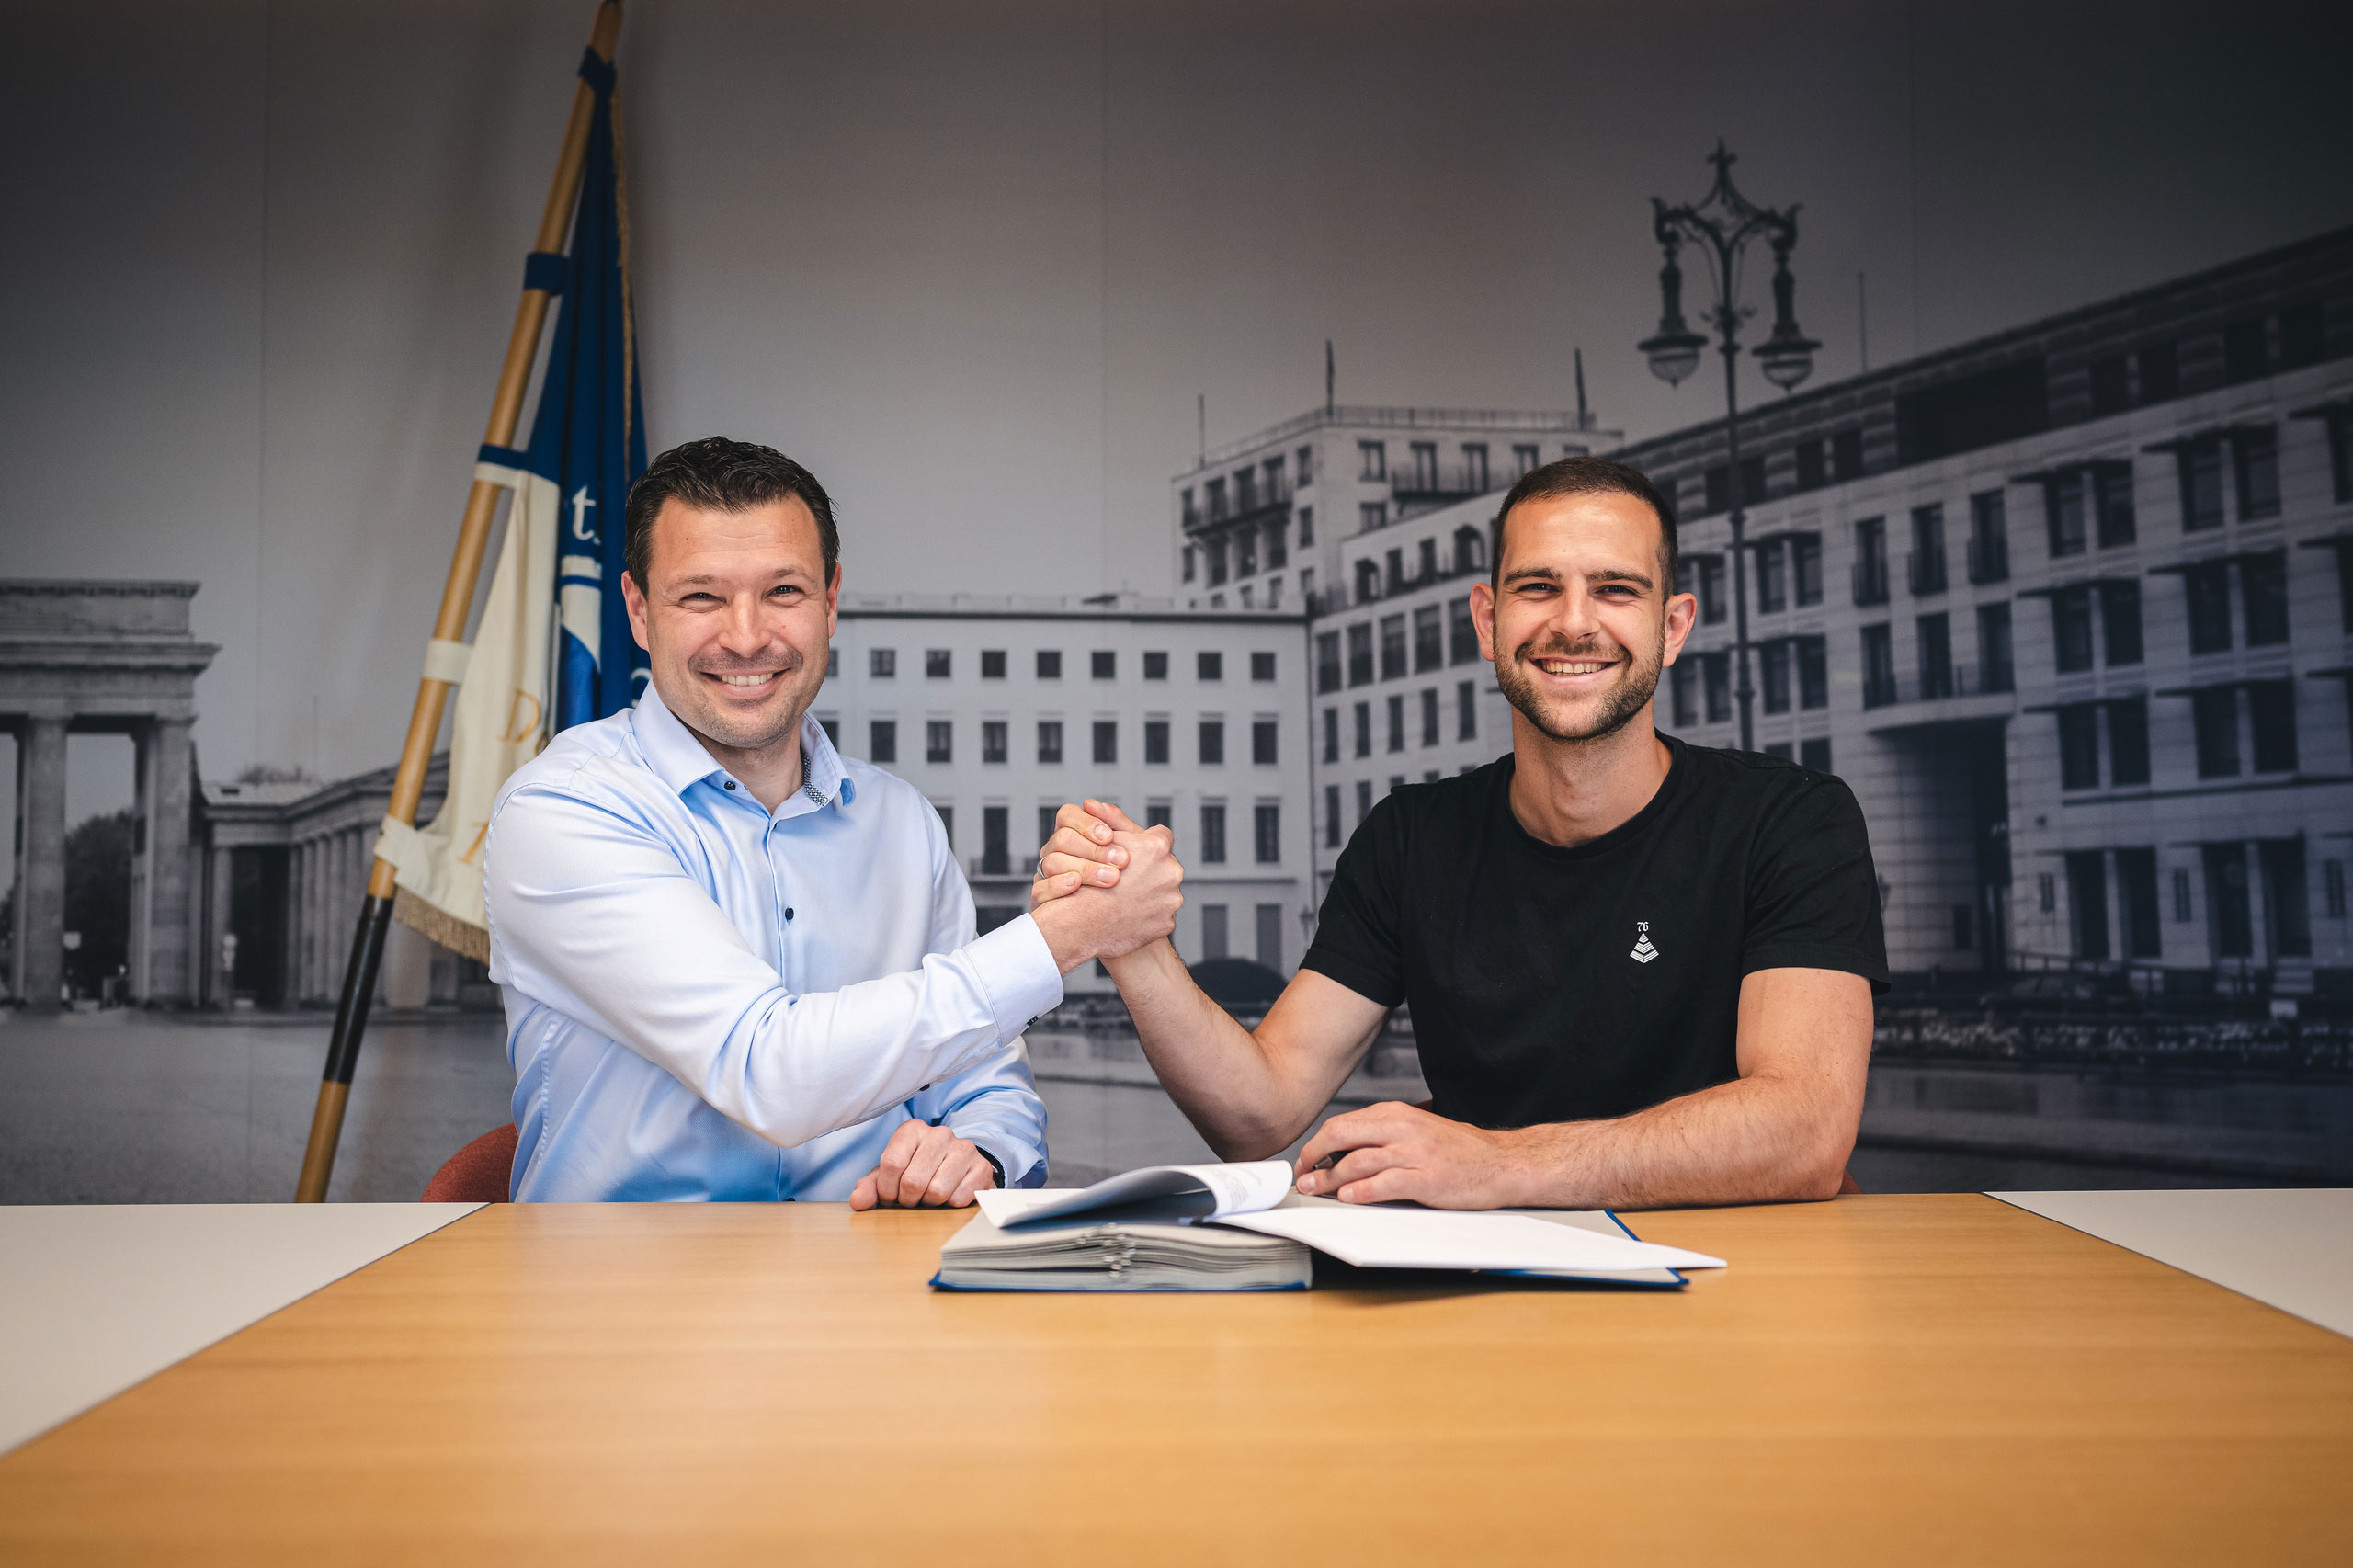 Benjamin Weber and Marius Gersbeck shake hands as the goalkeeper signs a contract with the club.